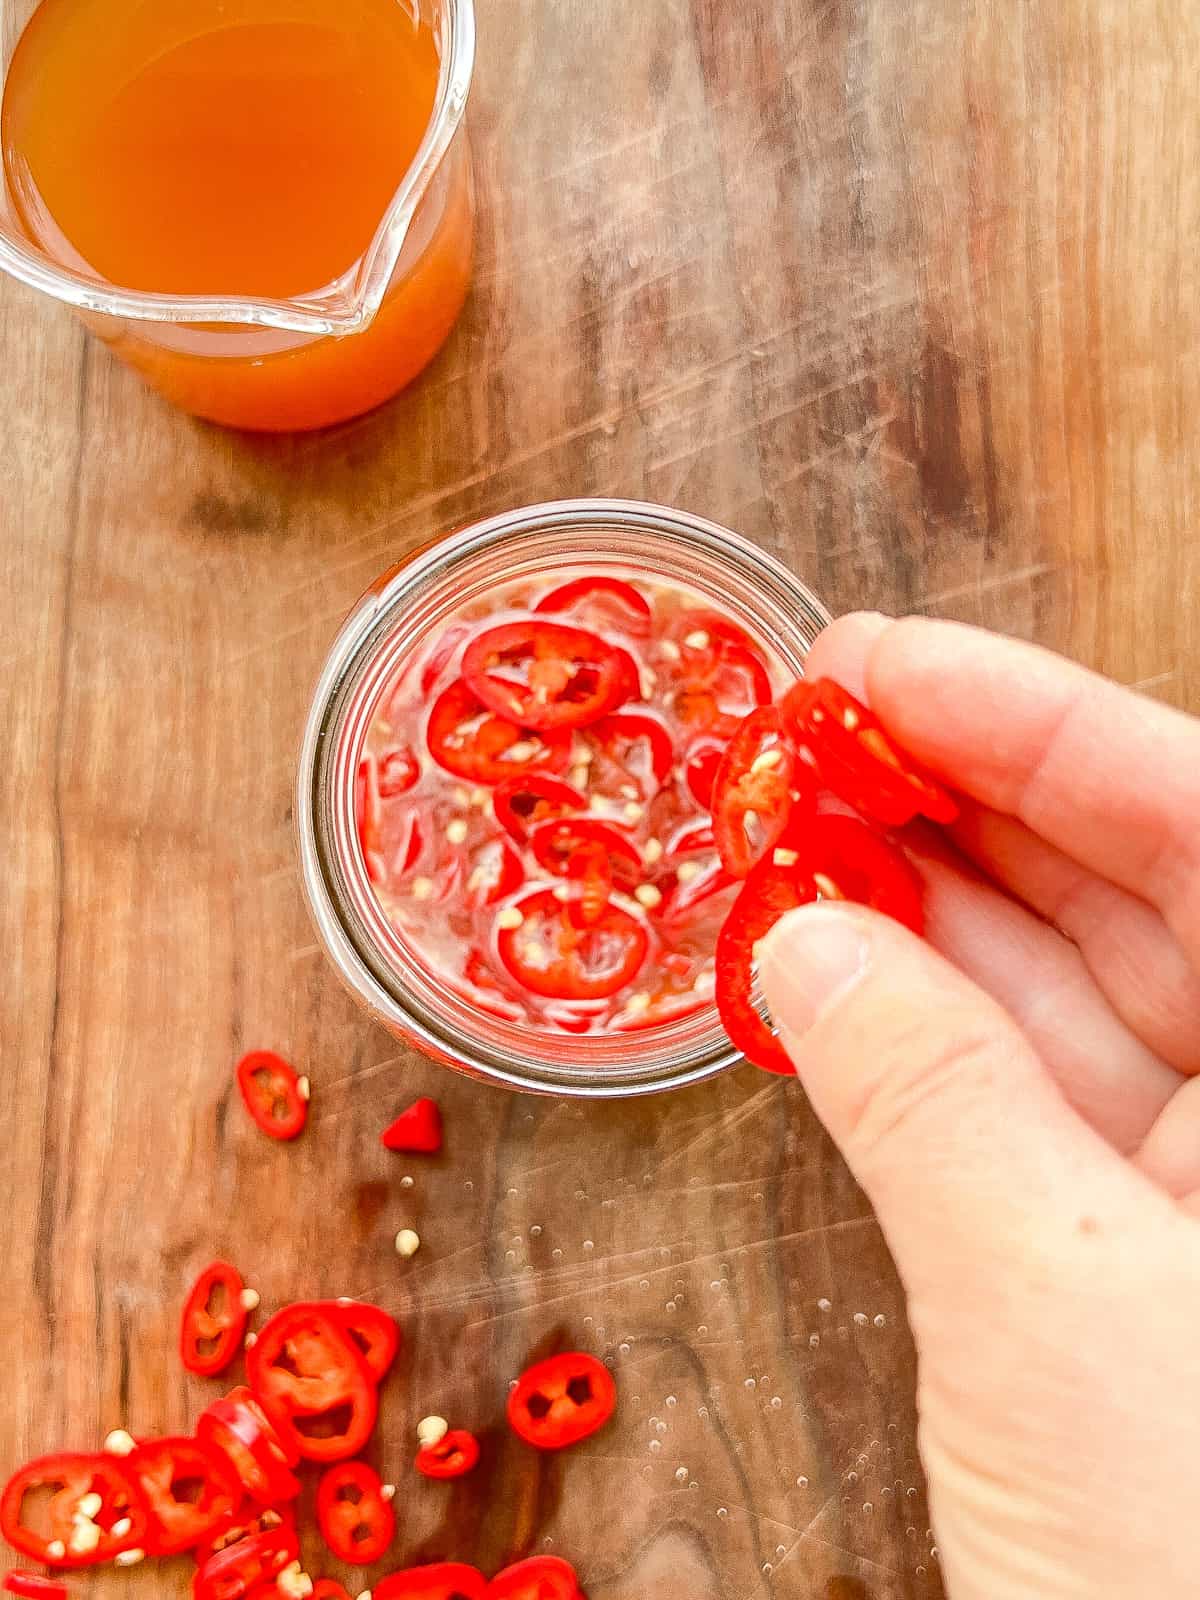 An image of a hand dropping sliced hot chillies into brine.